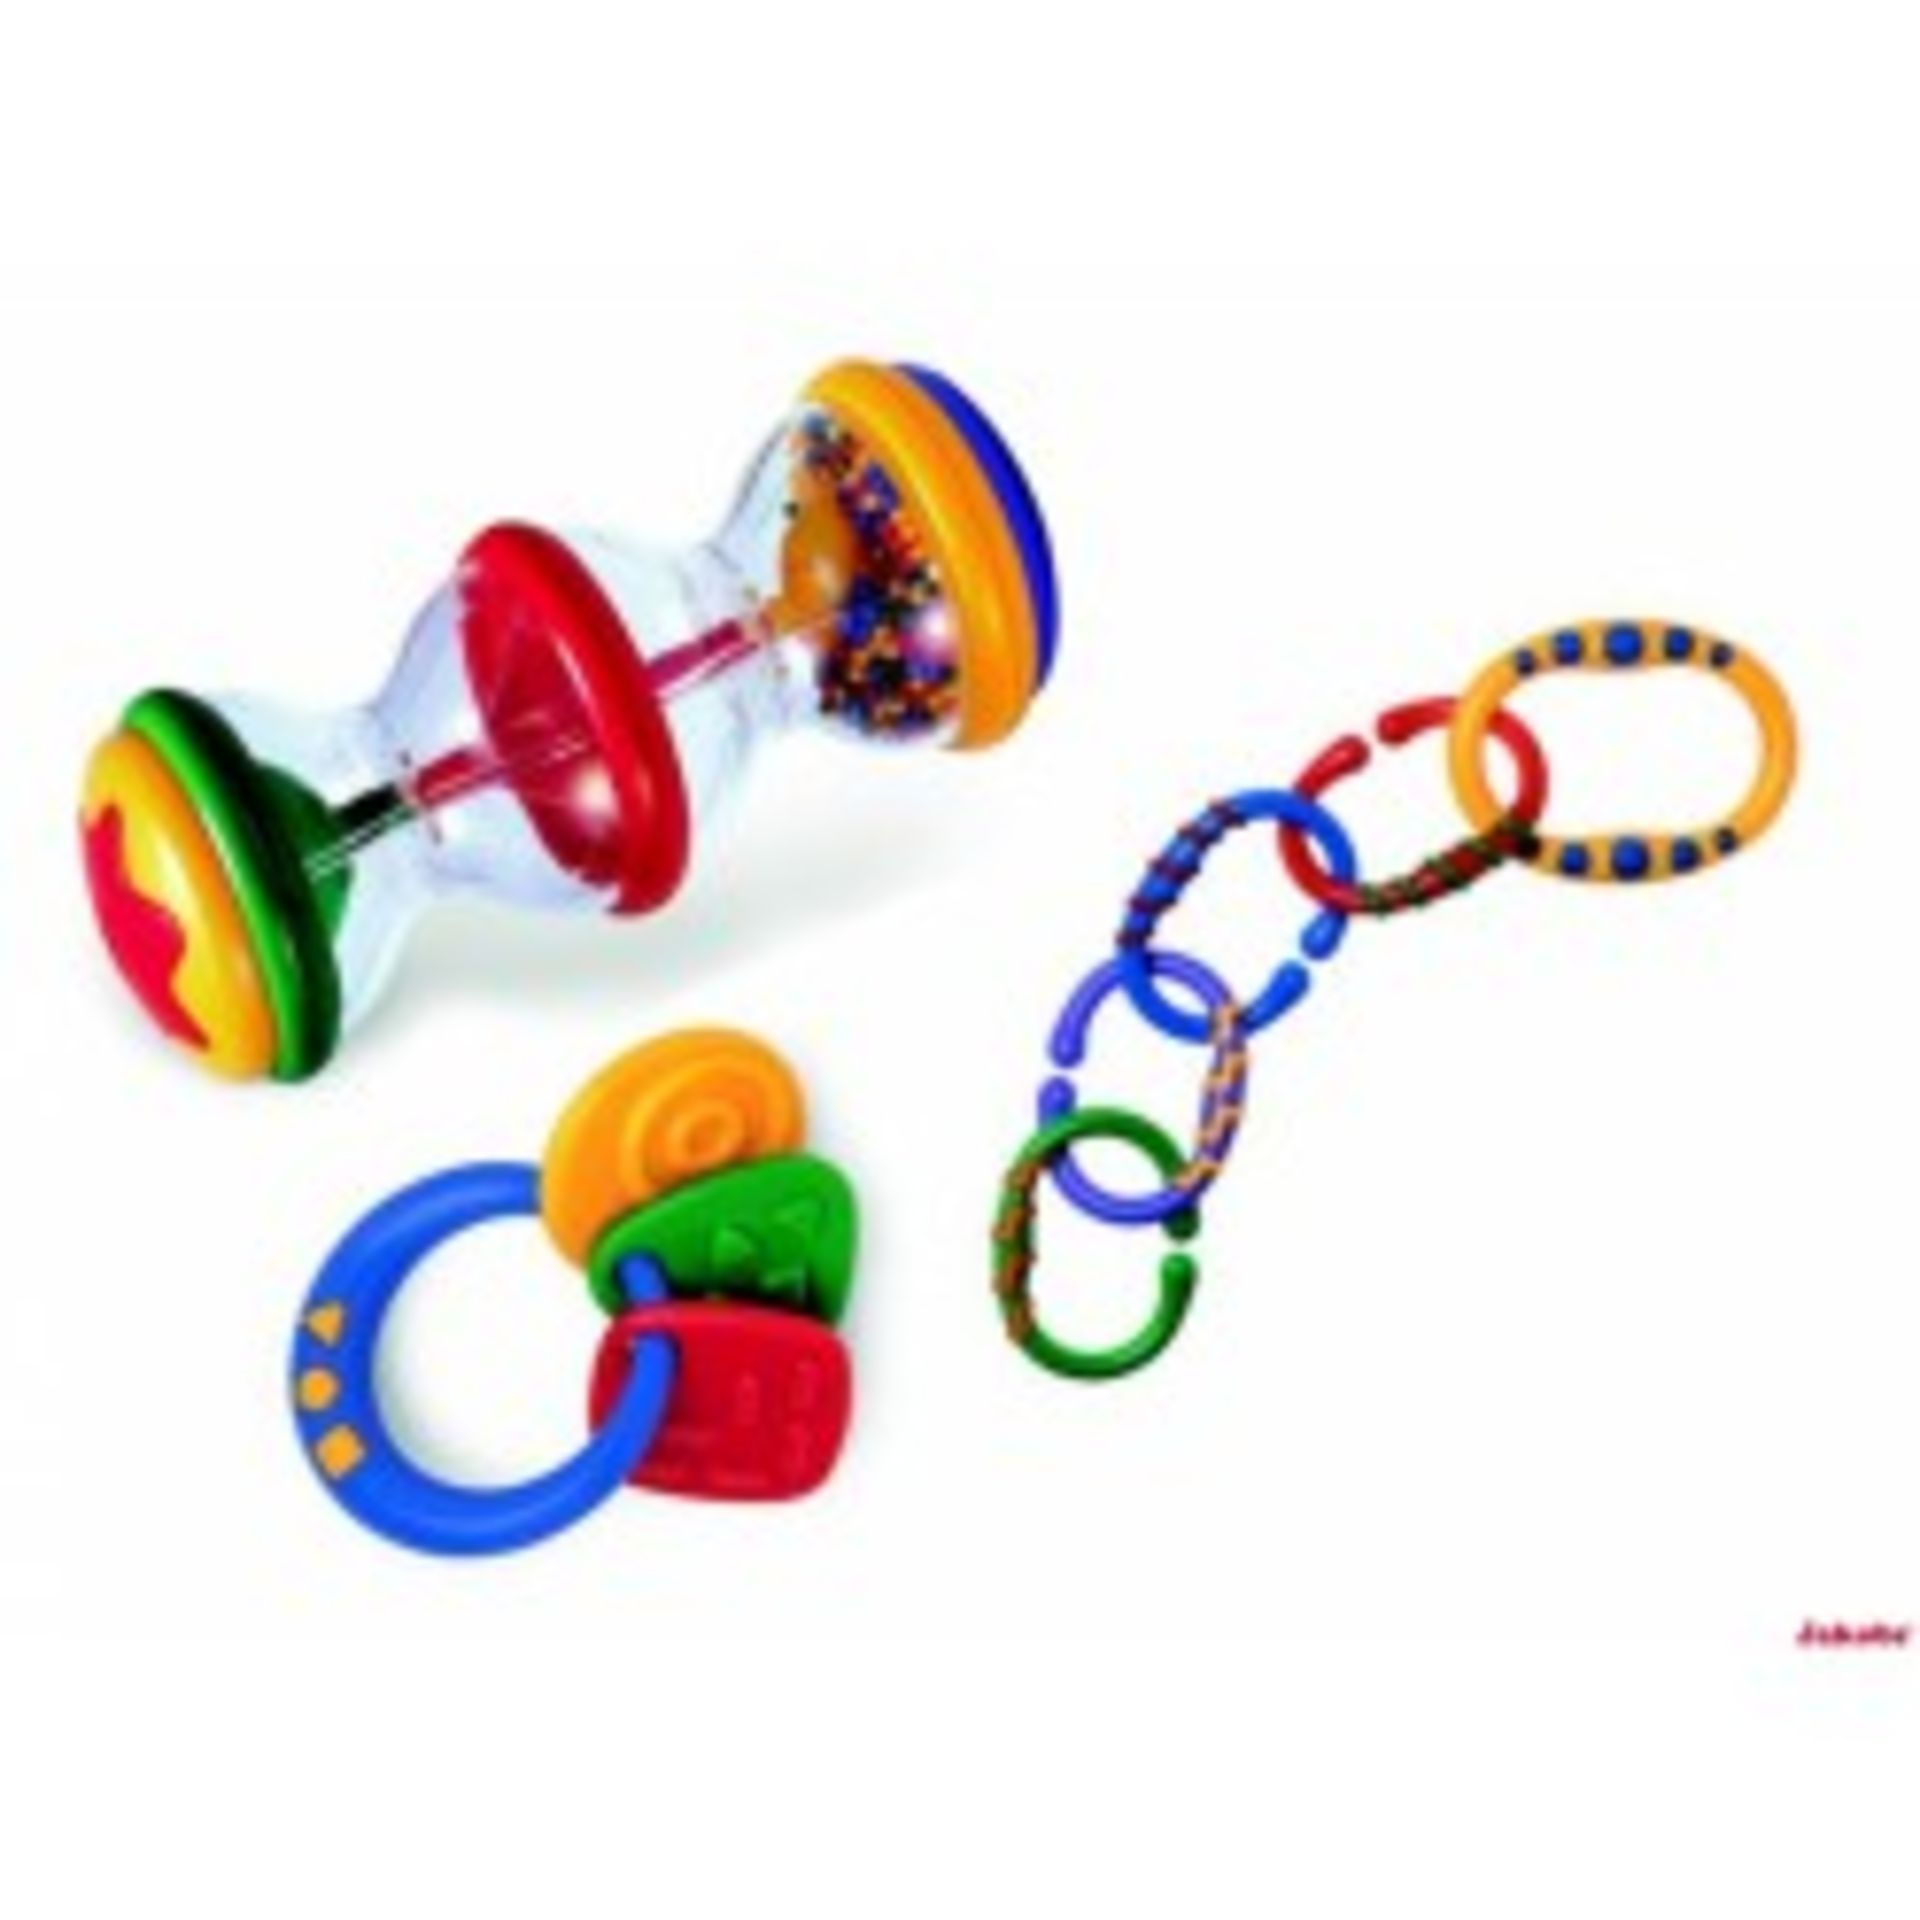 V *TRADE QTY* Brand New Tolo Activity Set Age 3mths+ X 3 YOUR BID PRICE TO BE MULTIPLIED BY THREE